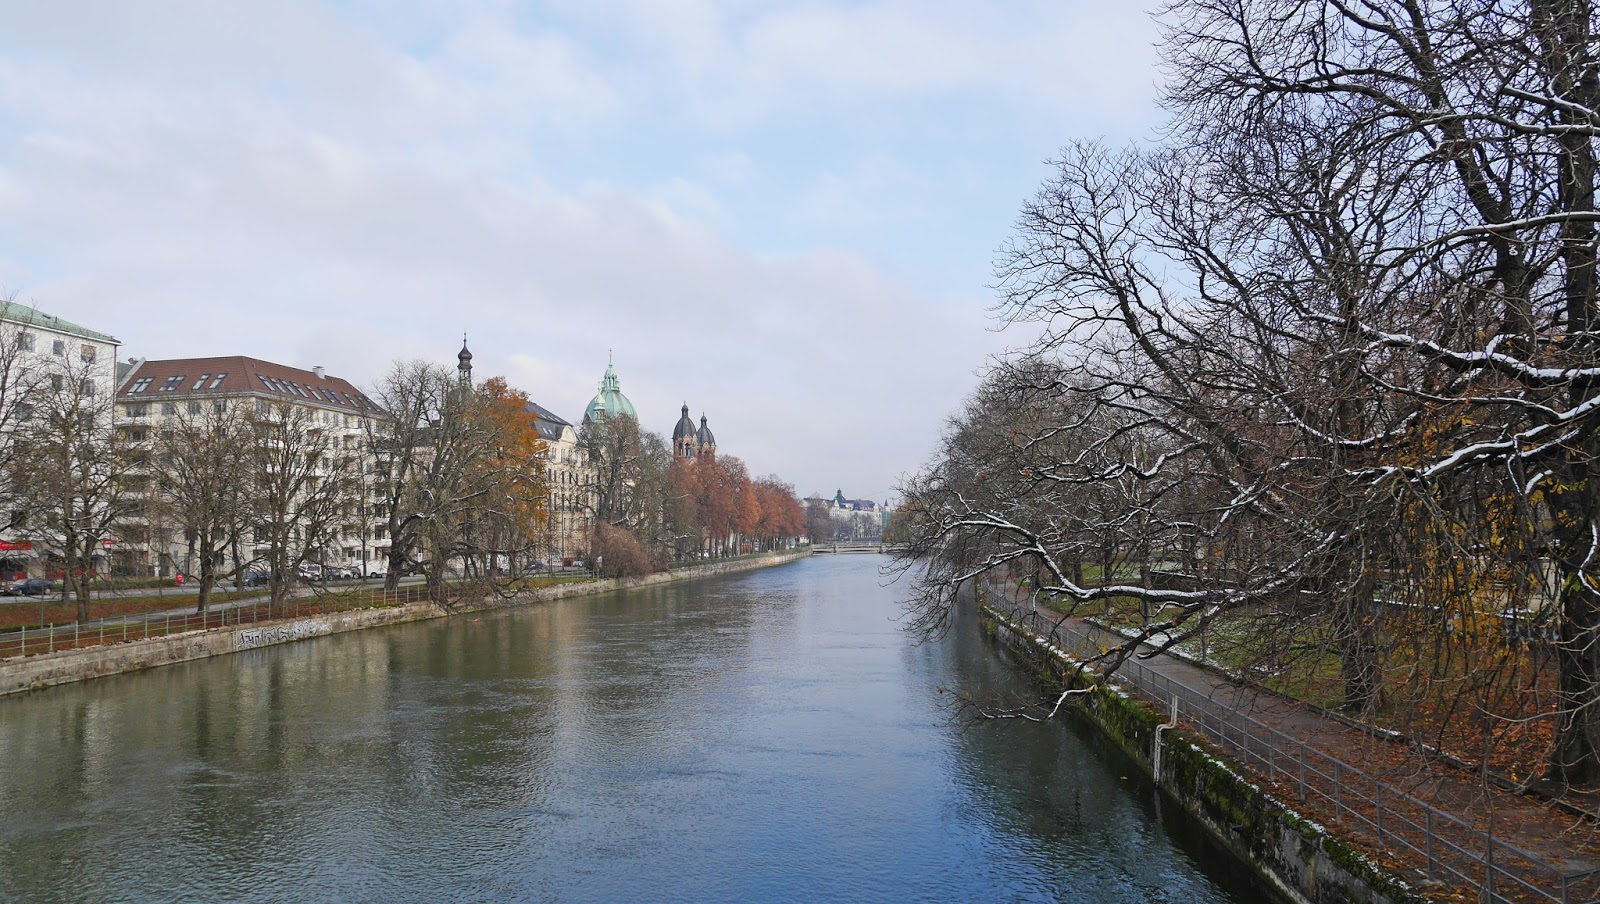 The Isar River, Munich